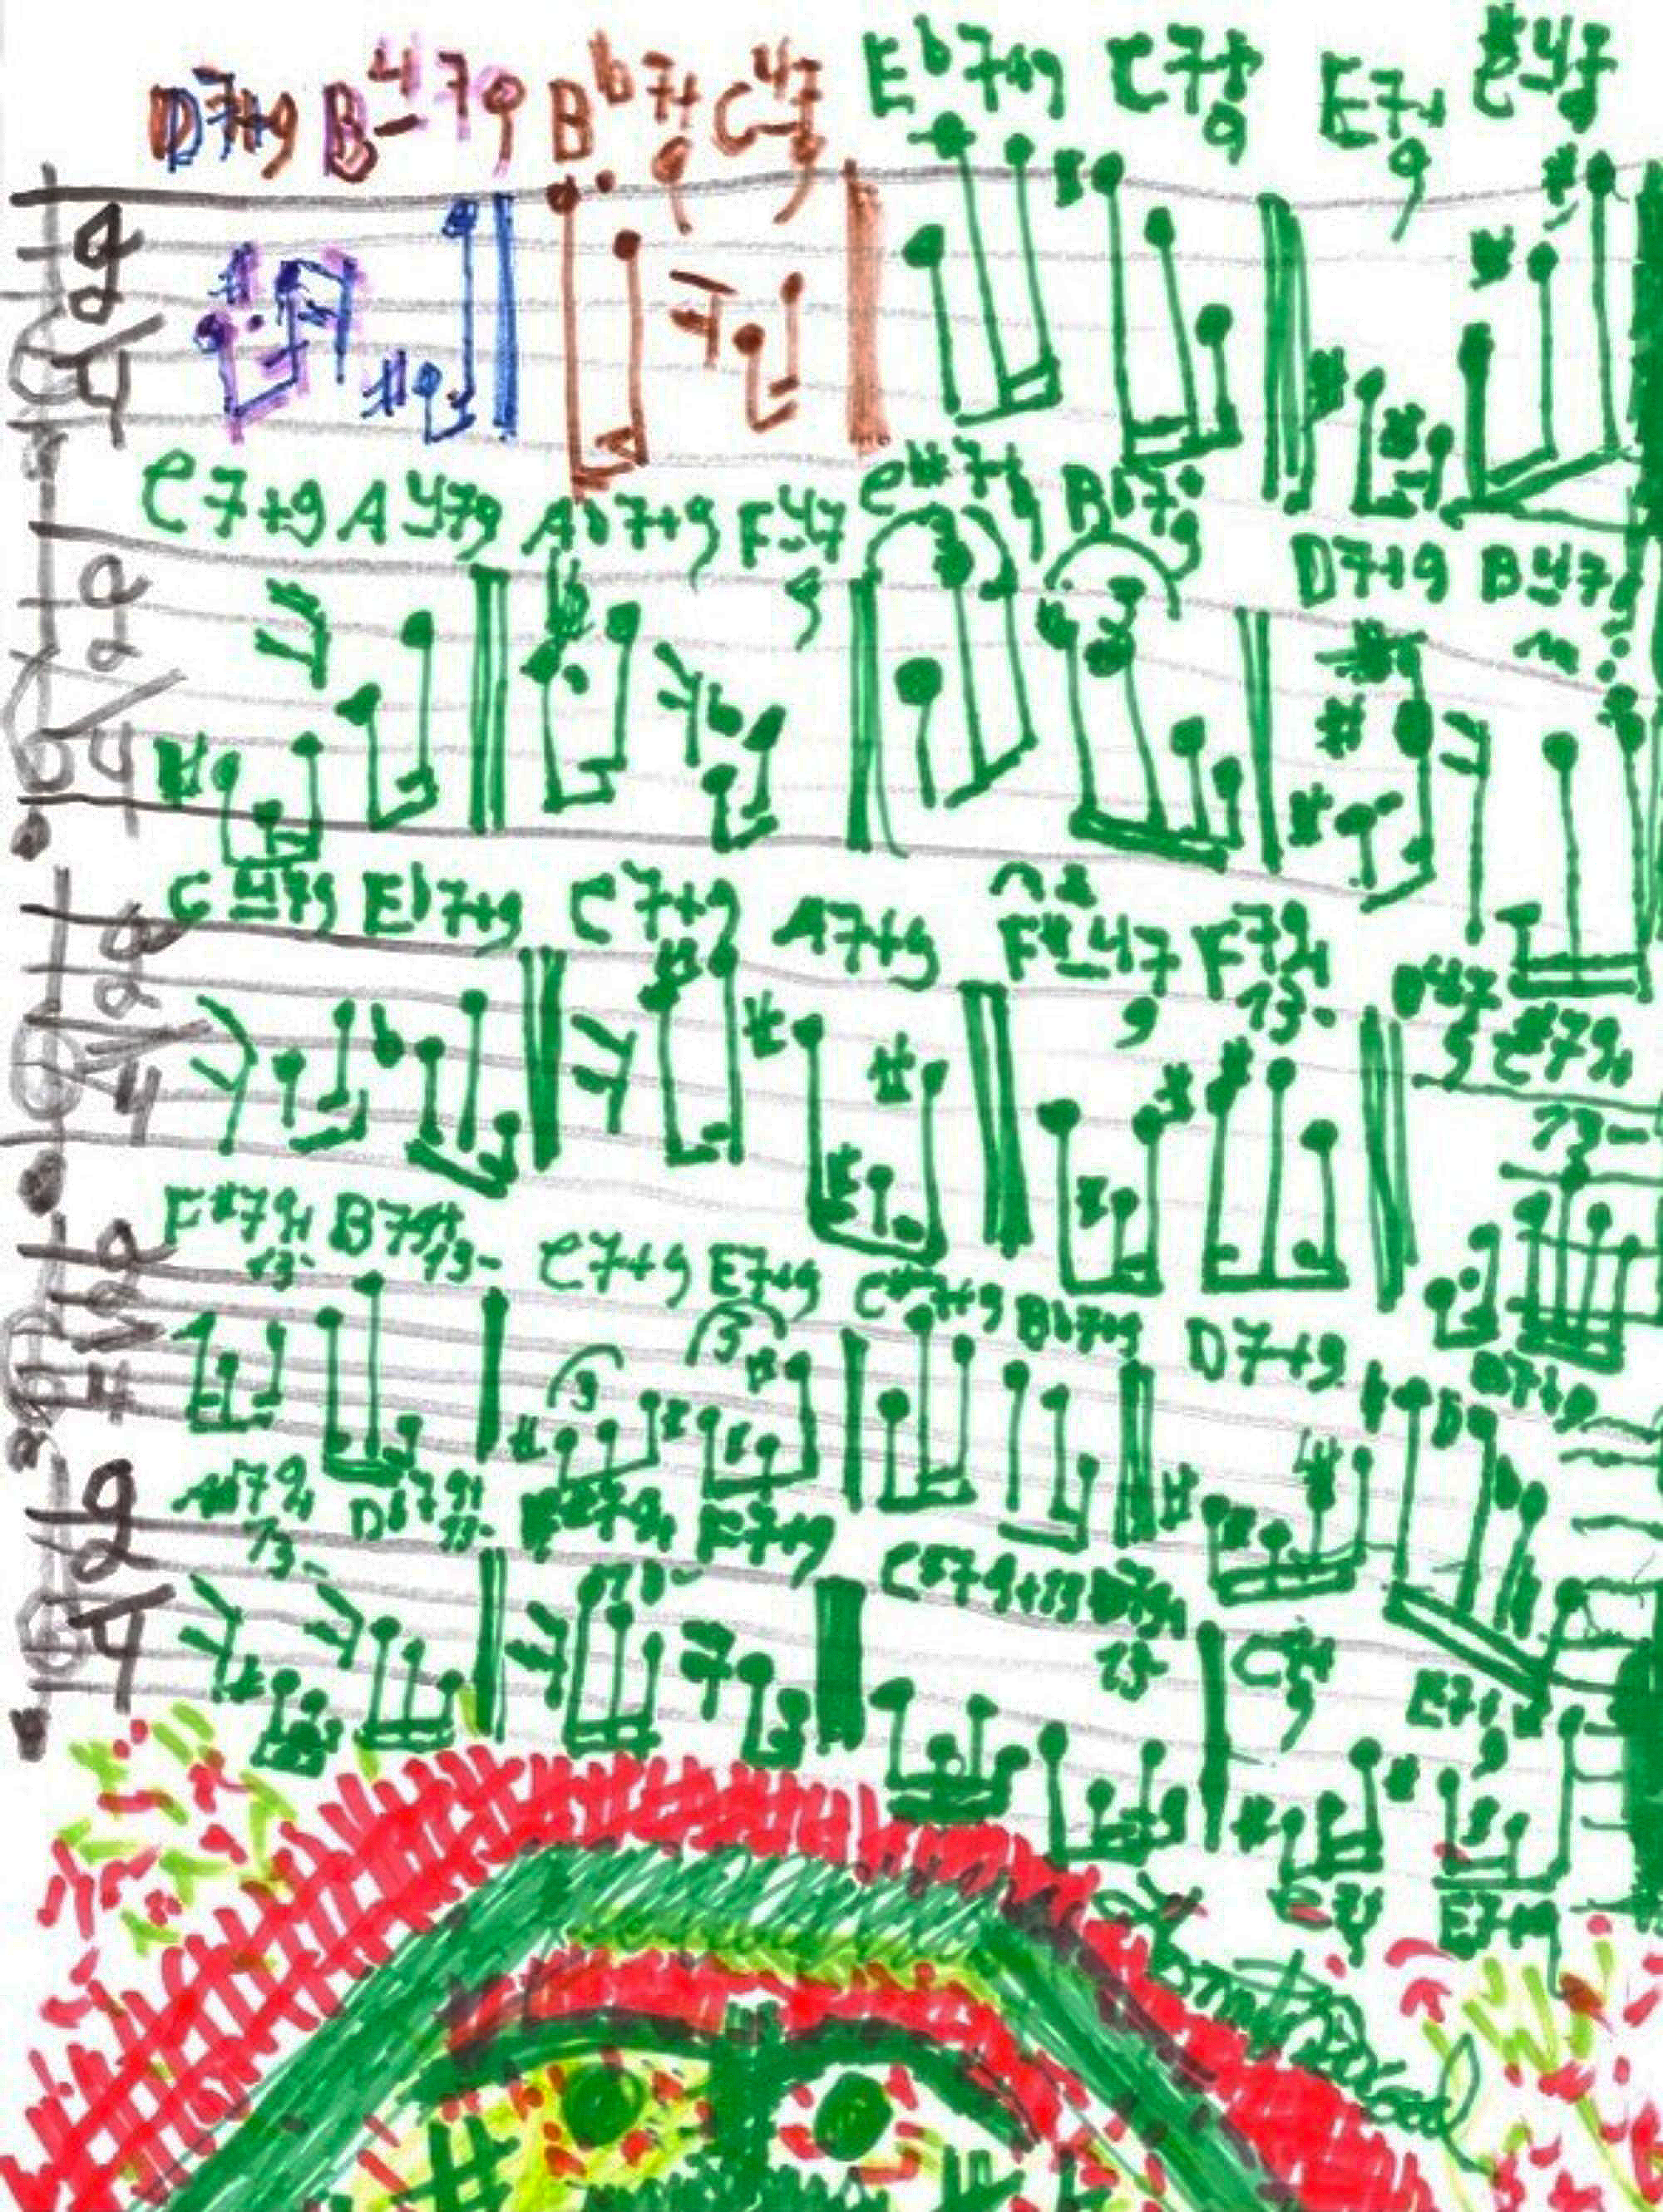 Sheet music hand-drawn in colorful marker, with a creature's face drawn at the bottom of the page.